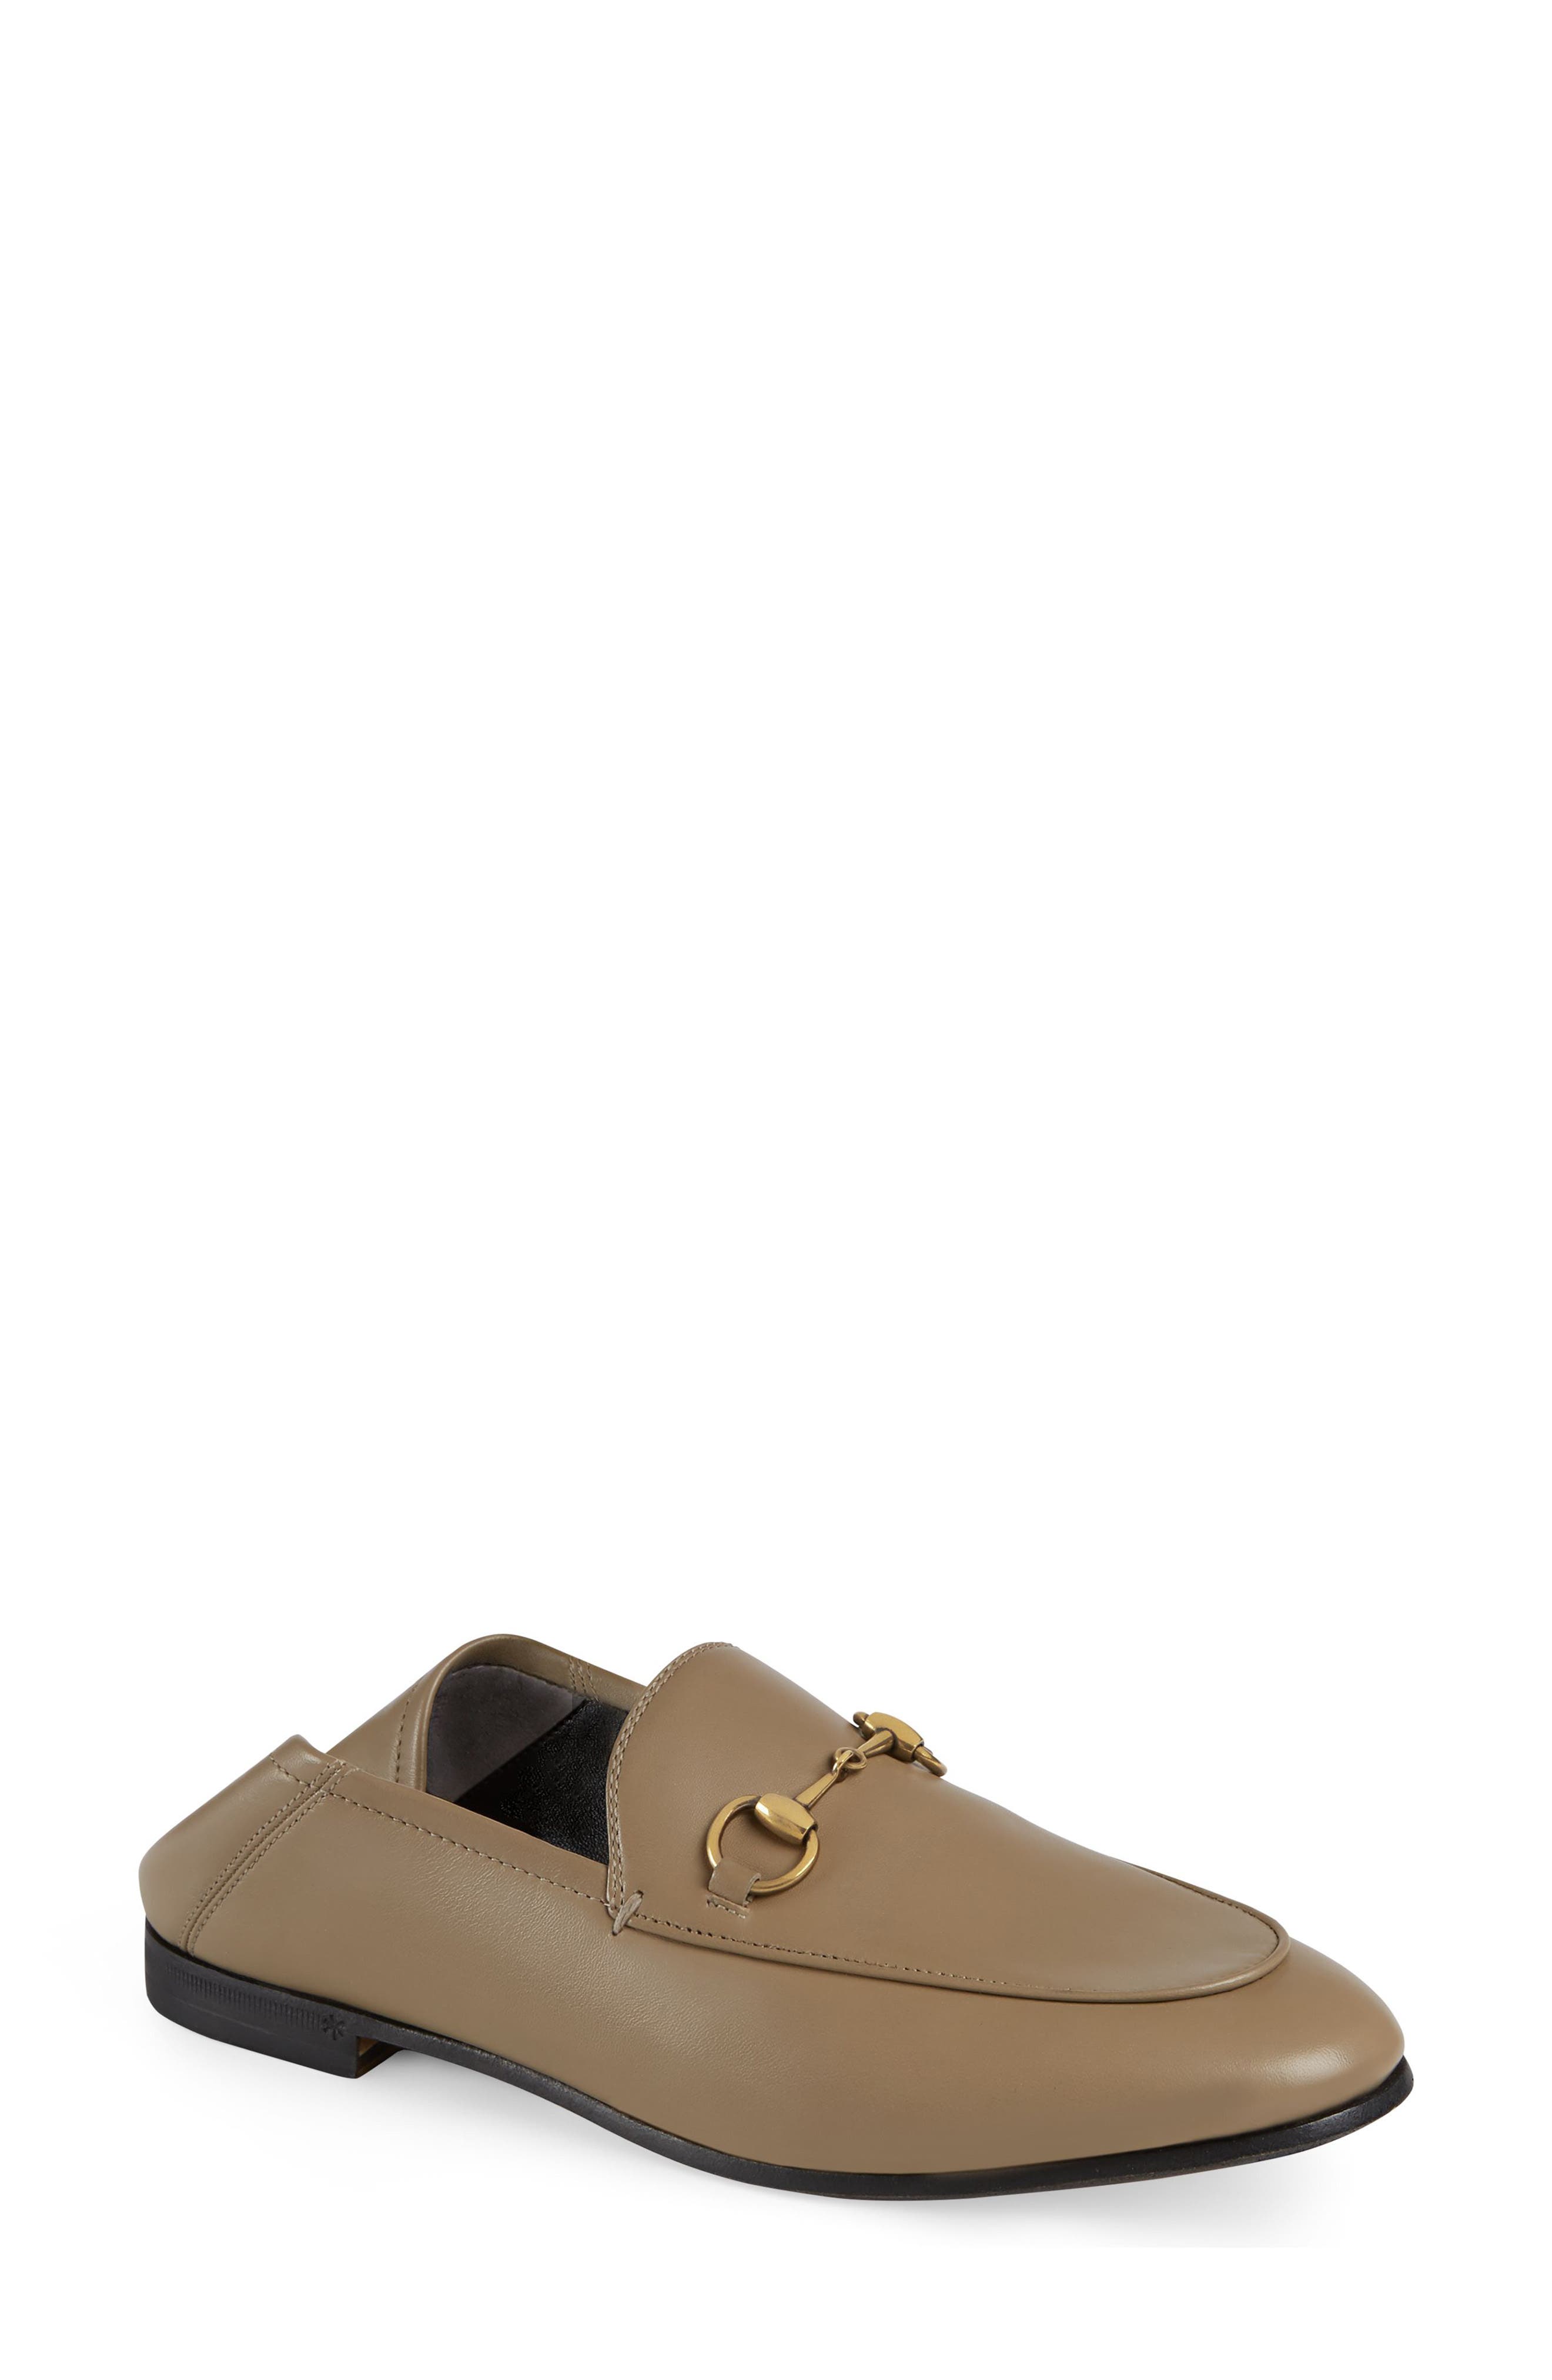 gucci shoes nordstrom price